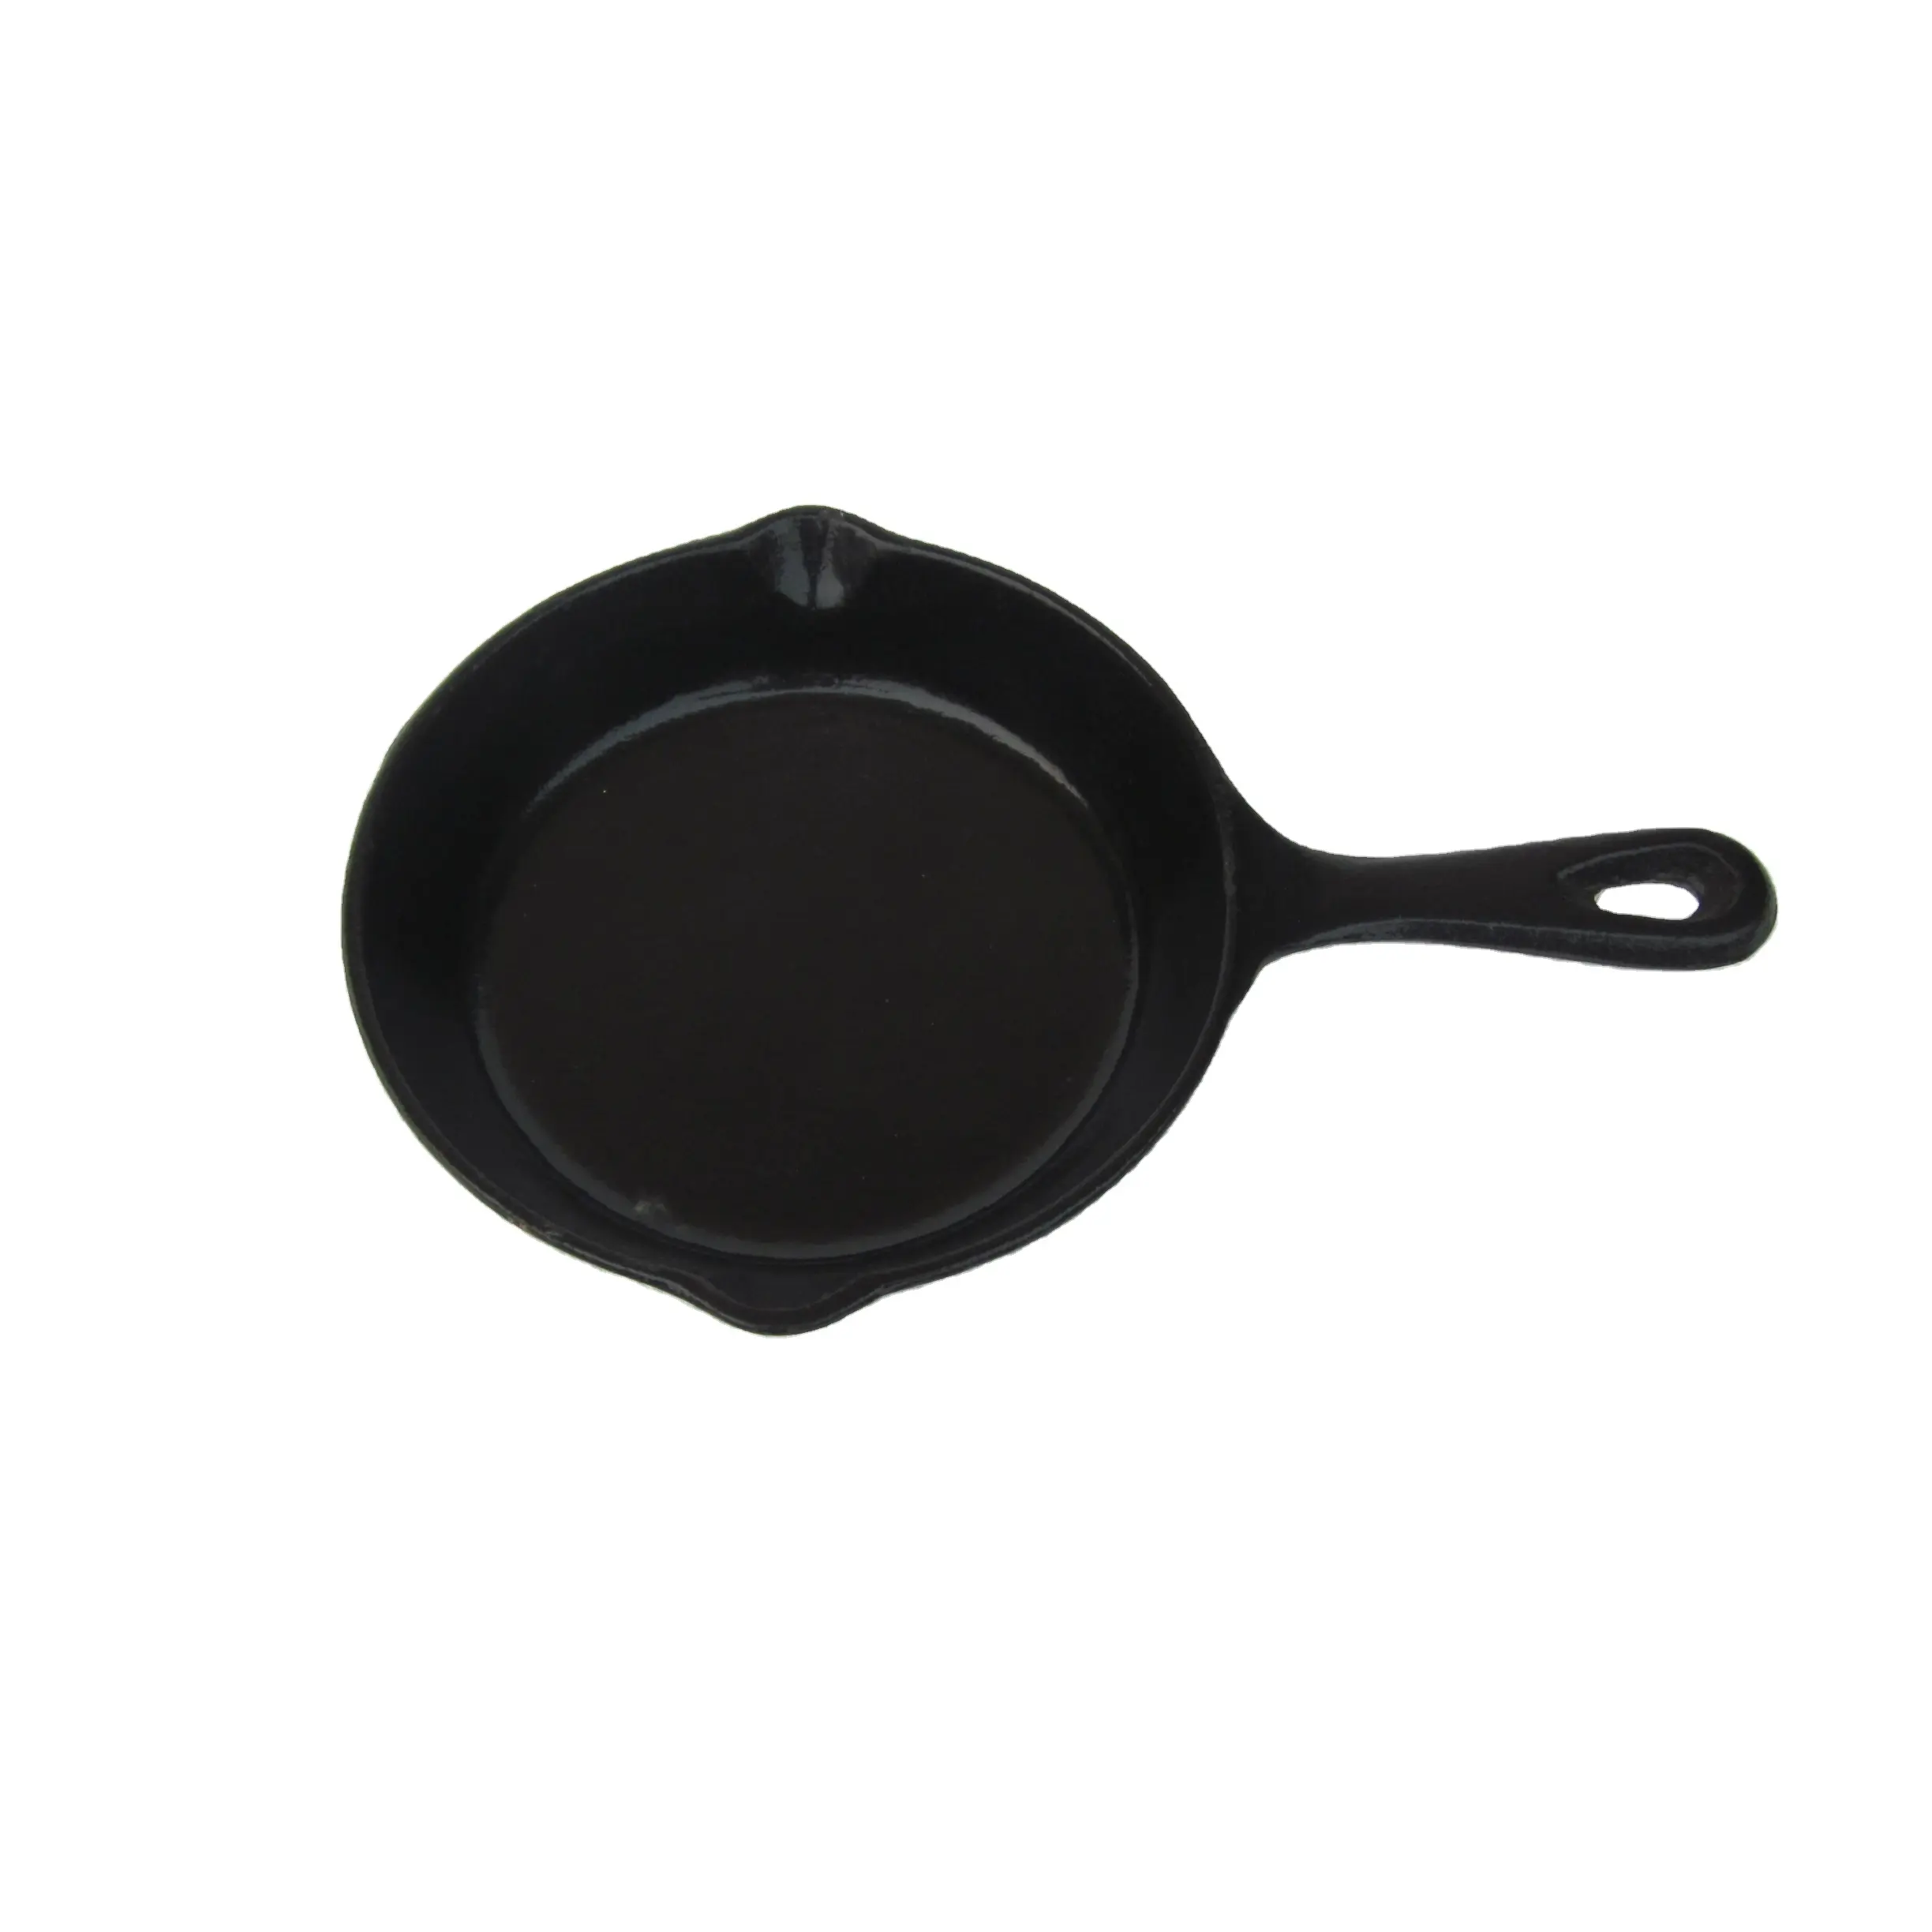 6 8 10 12 inch cast iron pre seasoned pan skillet with iron handle for home kitchenware